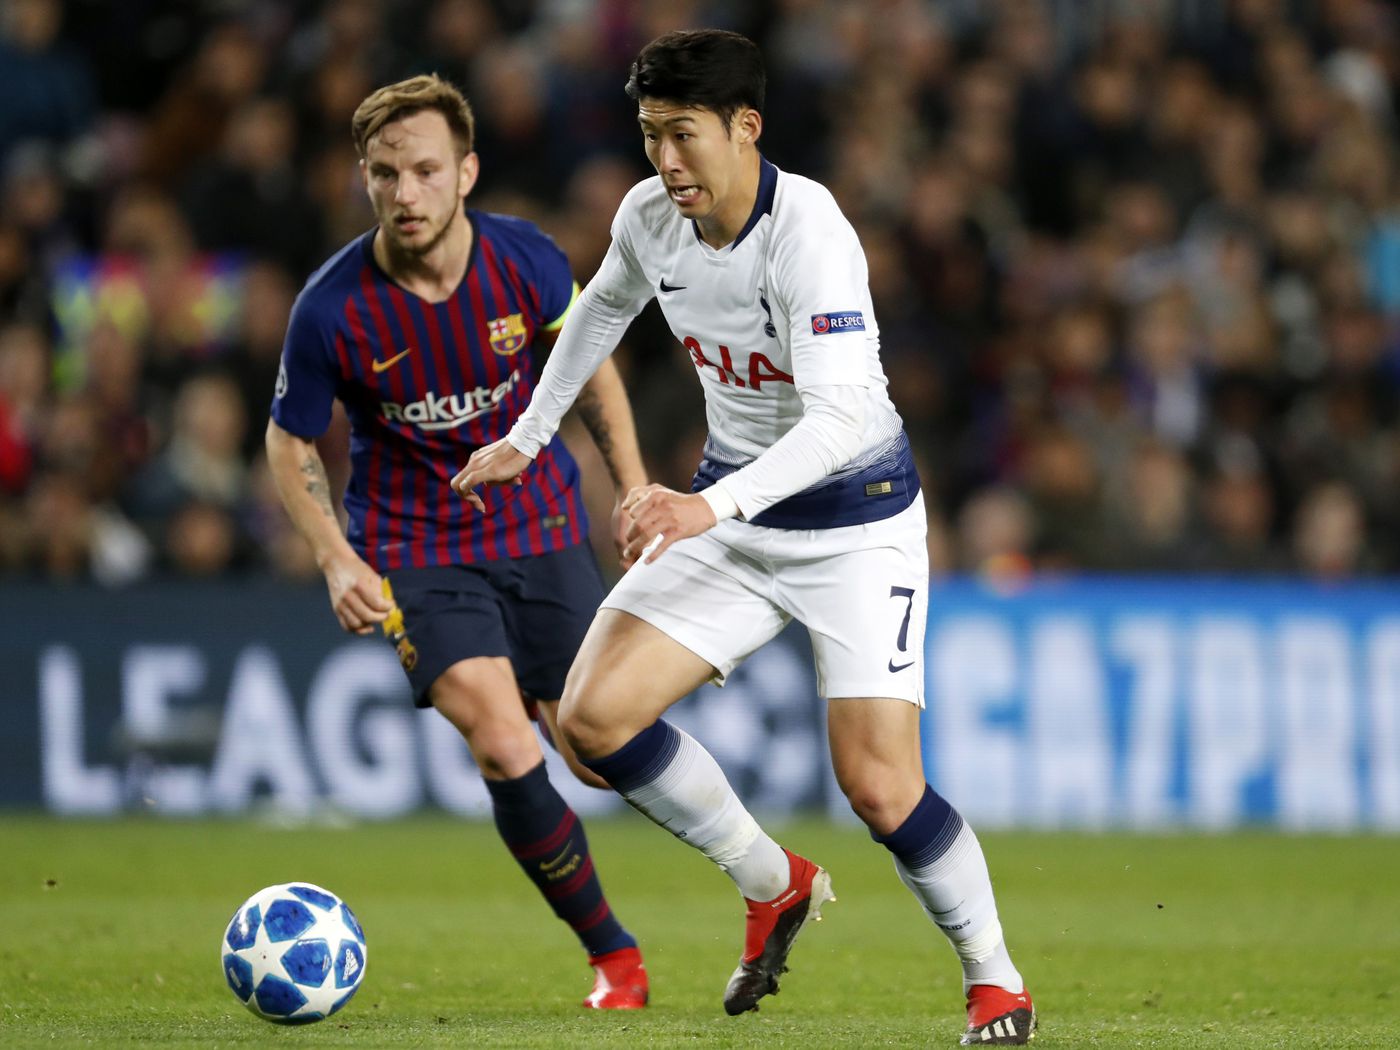 Rakitic May Move from Barcelona to Tottenham in His Prime